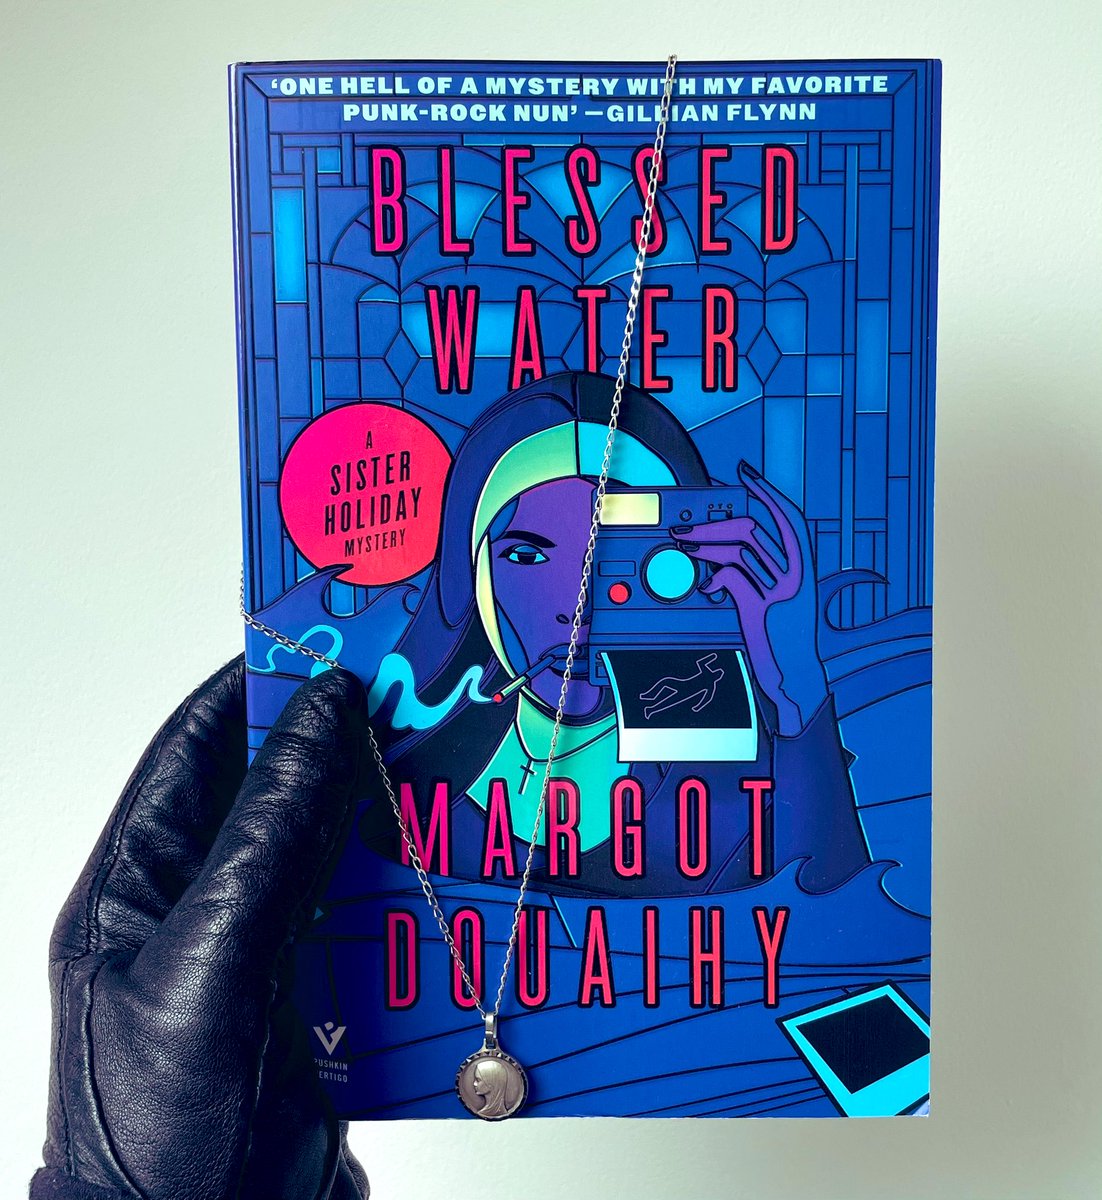 💧#BlessedWater by @MargotDouaihy is out in the world! Get your hands on this 2nd instalment of your favourite punk nun Sister Holiday’s mysteries! #BookReview now up on the blog! 👇🏻 Thanks again to @emily_egg and @PushkinVertigo for my copy 💙 agjbooksandgems.com/2024/04/08/ble…